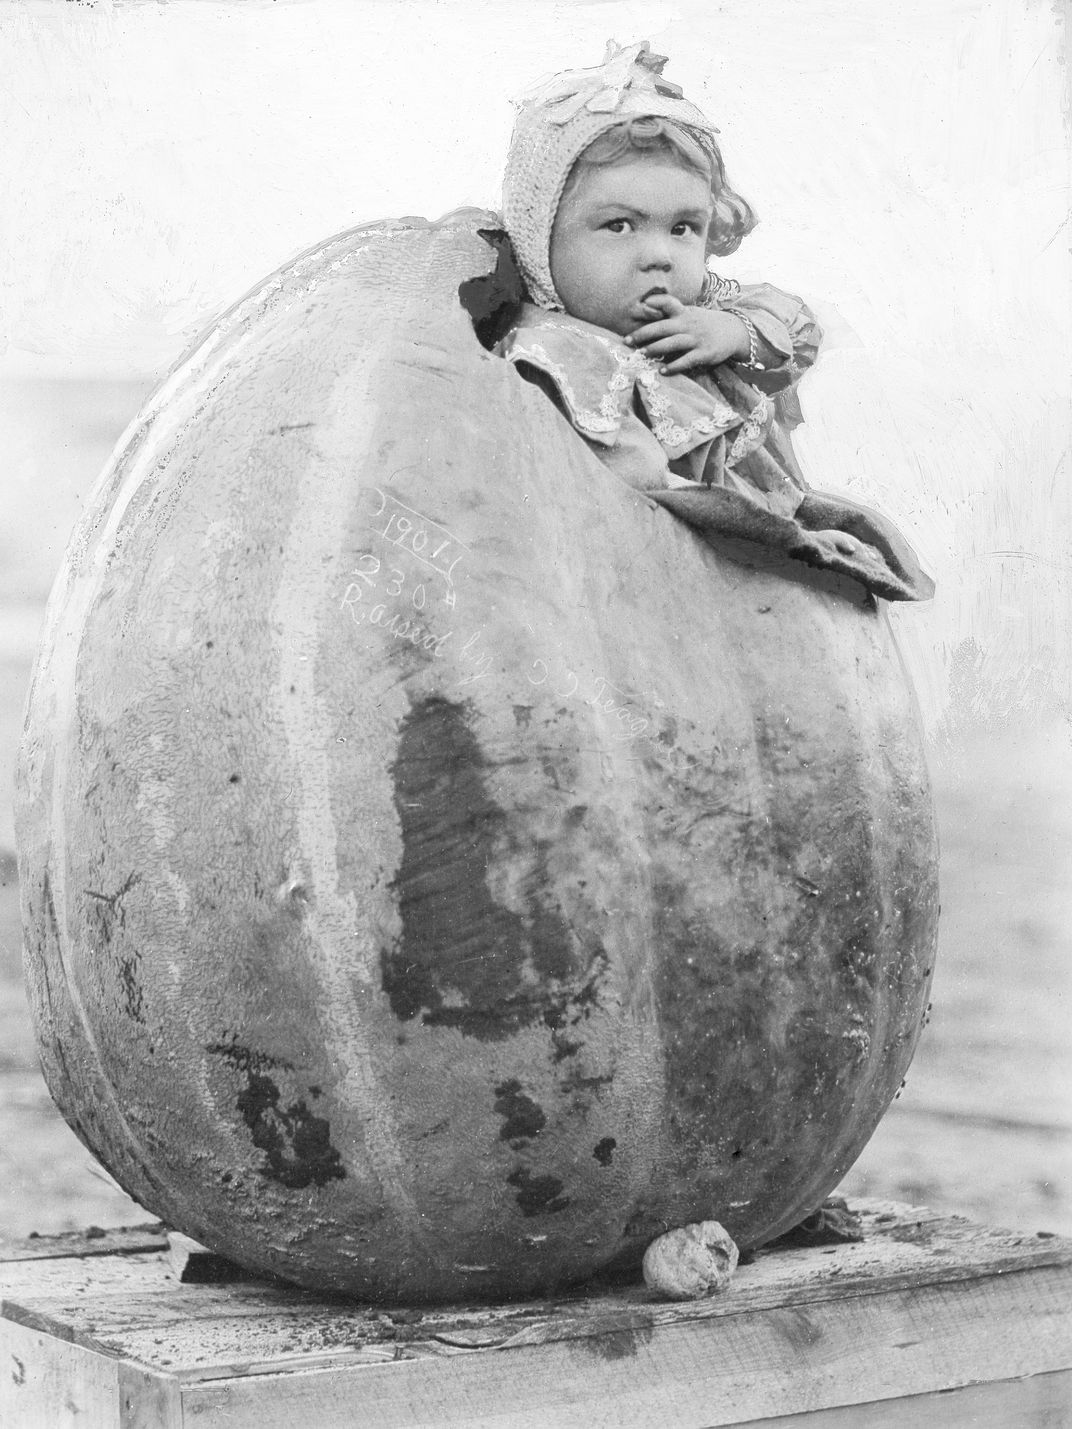 A photo from an early 20th-century magazine shows a child in a giant Californian pumpkin.